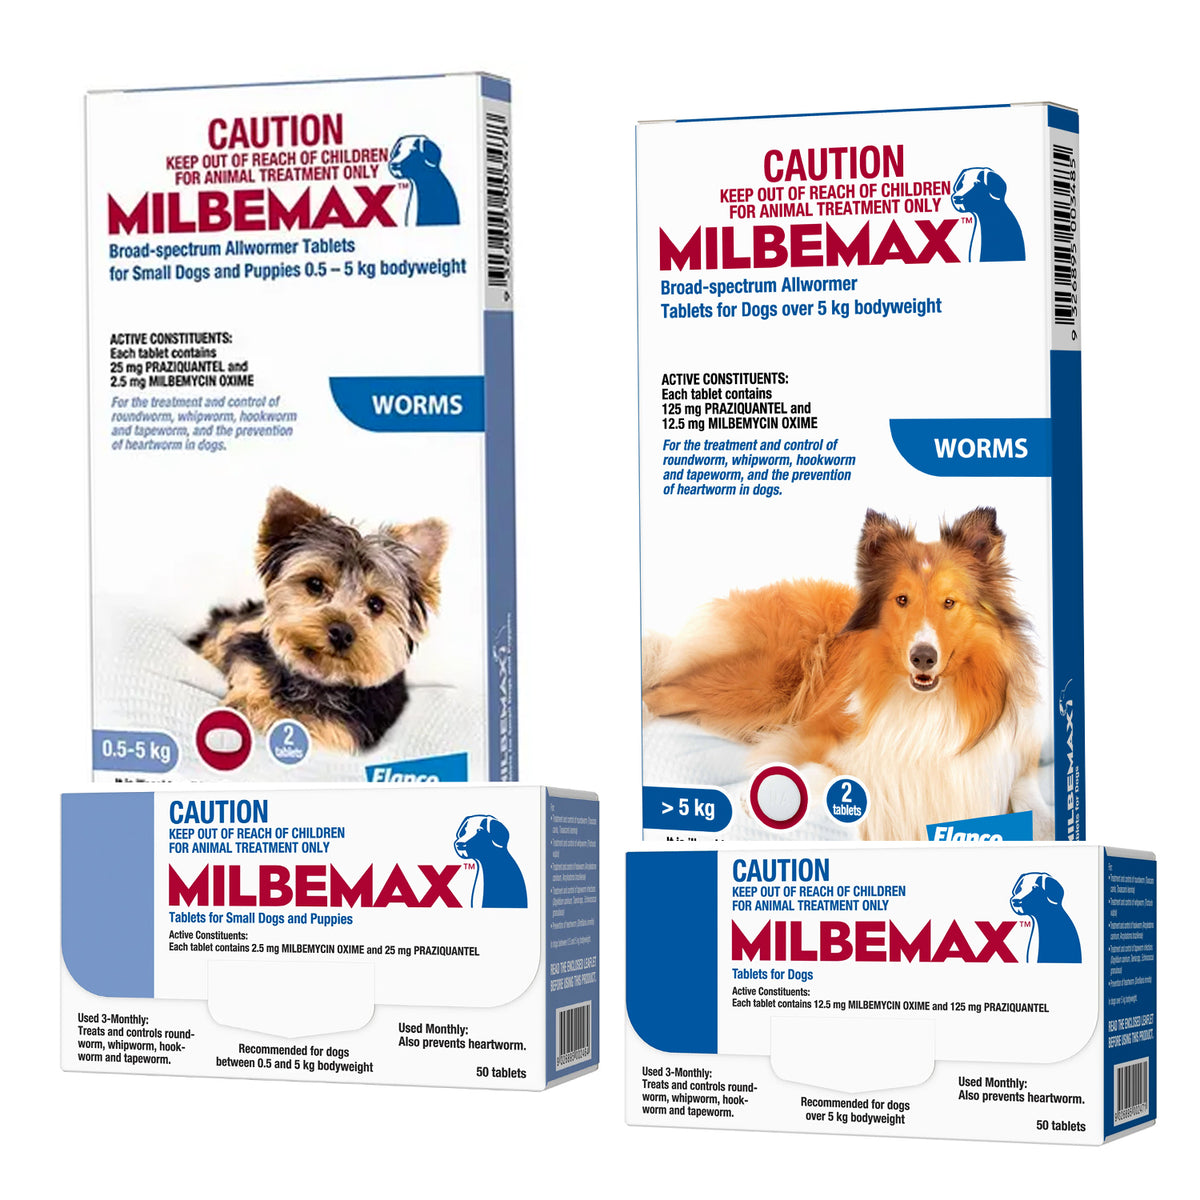 Milbemax Broad Spectrum Wormer for Dogs